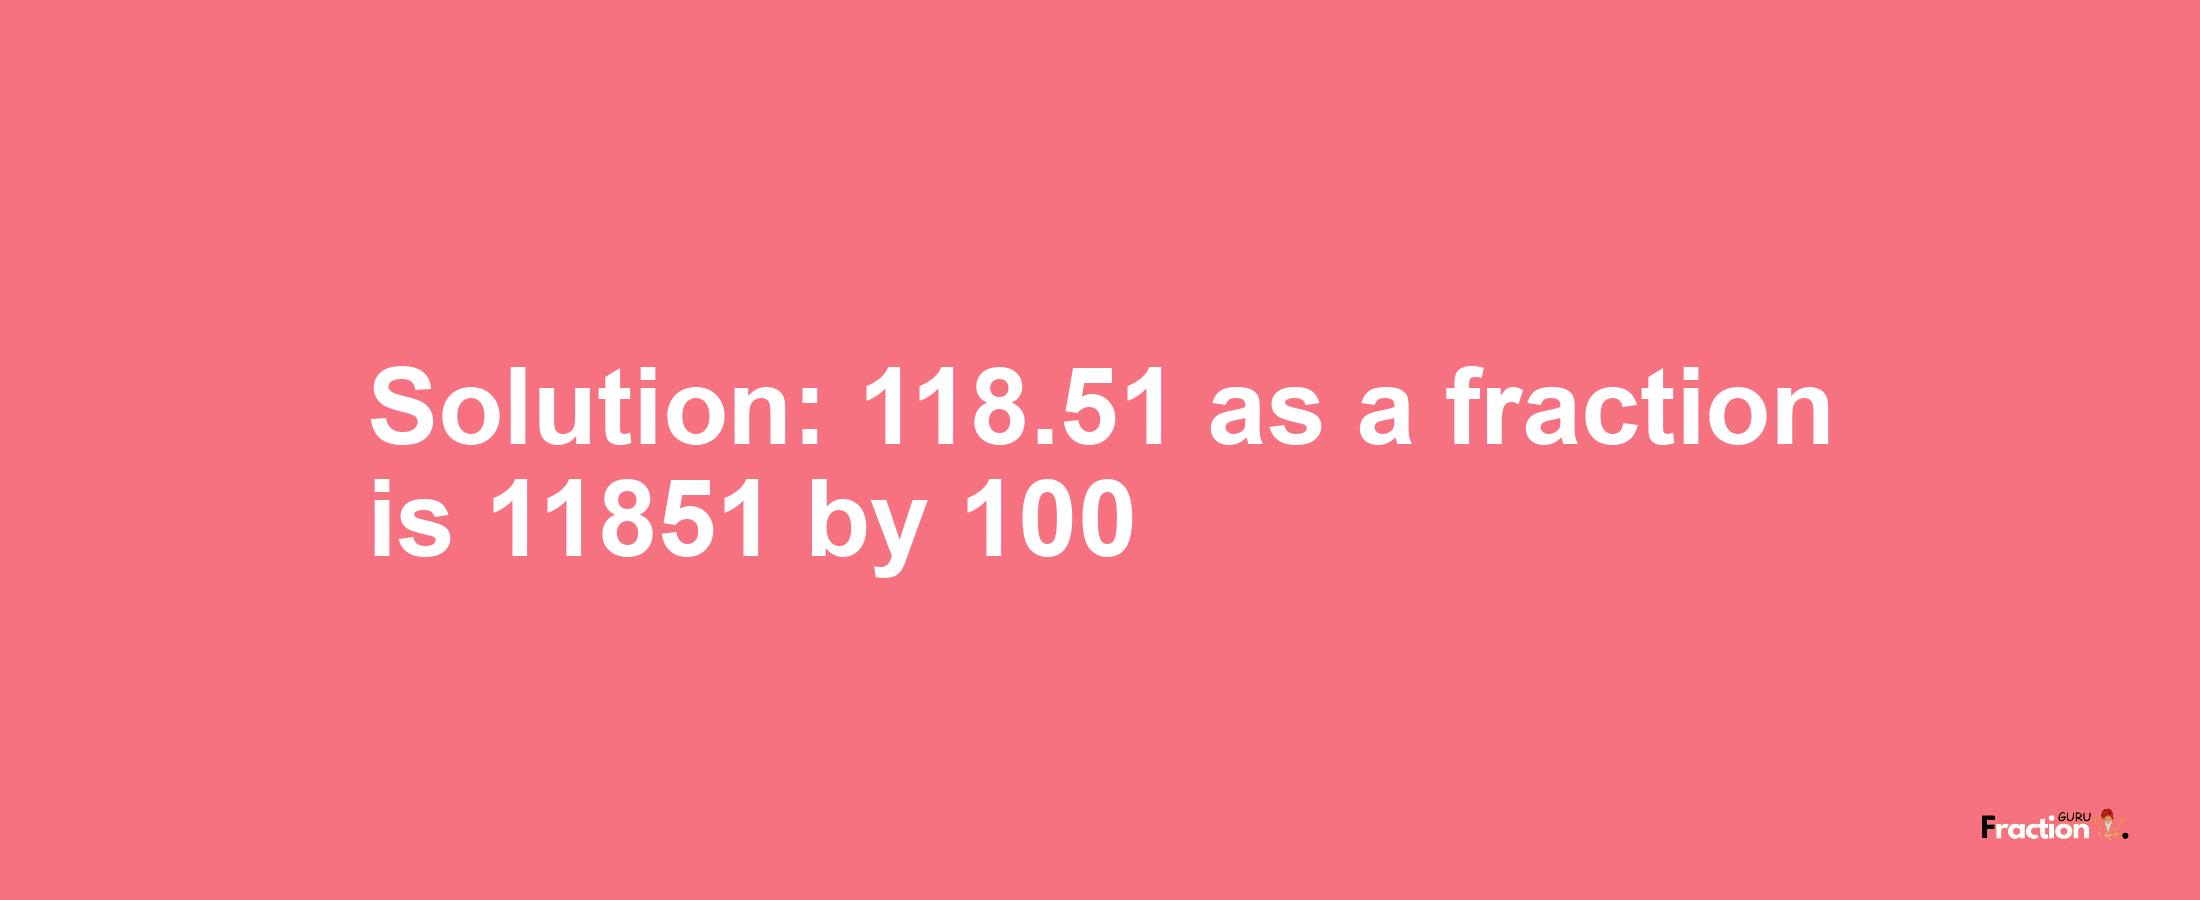 Solution:118.51 as a fraction is 11851/100